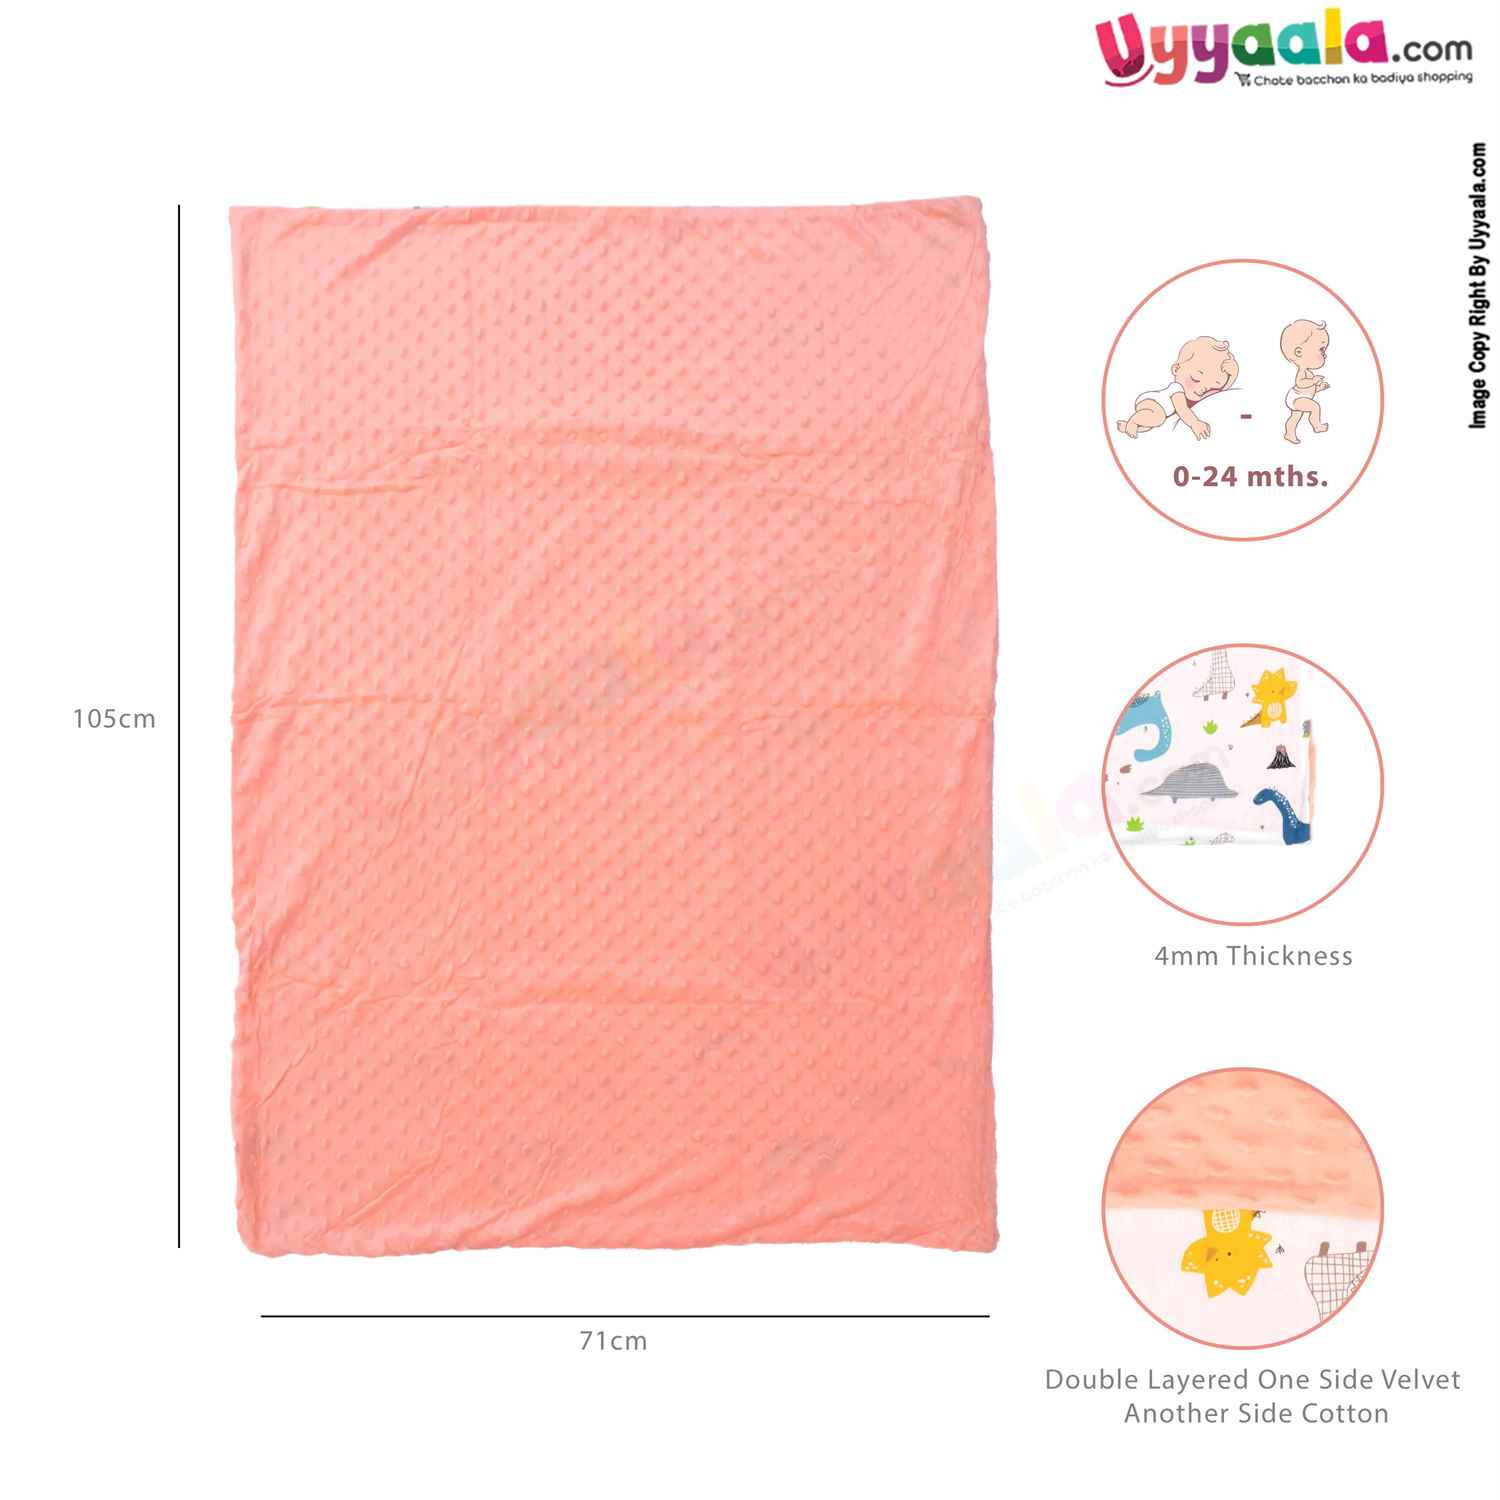 Double Layered Wrapper Premium One Side Velvet & Other Side Cotton with Dions Print for Babies 0-24m Age, Size(105*71cm)- White & Peach